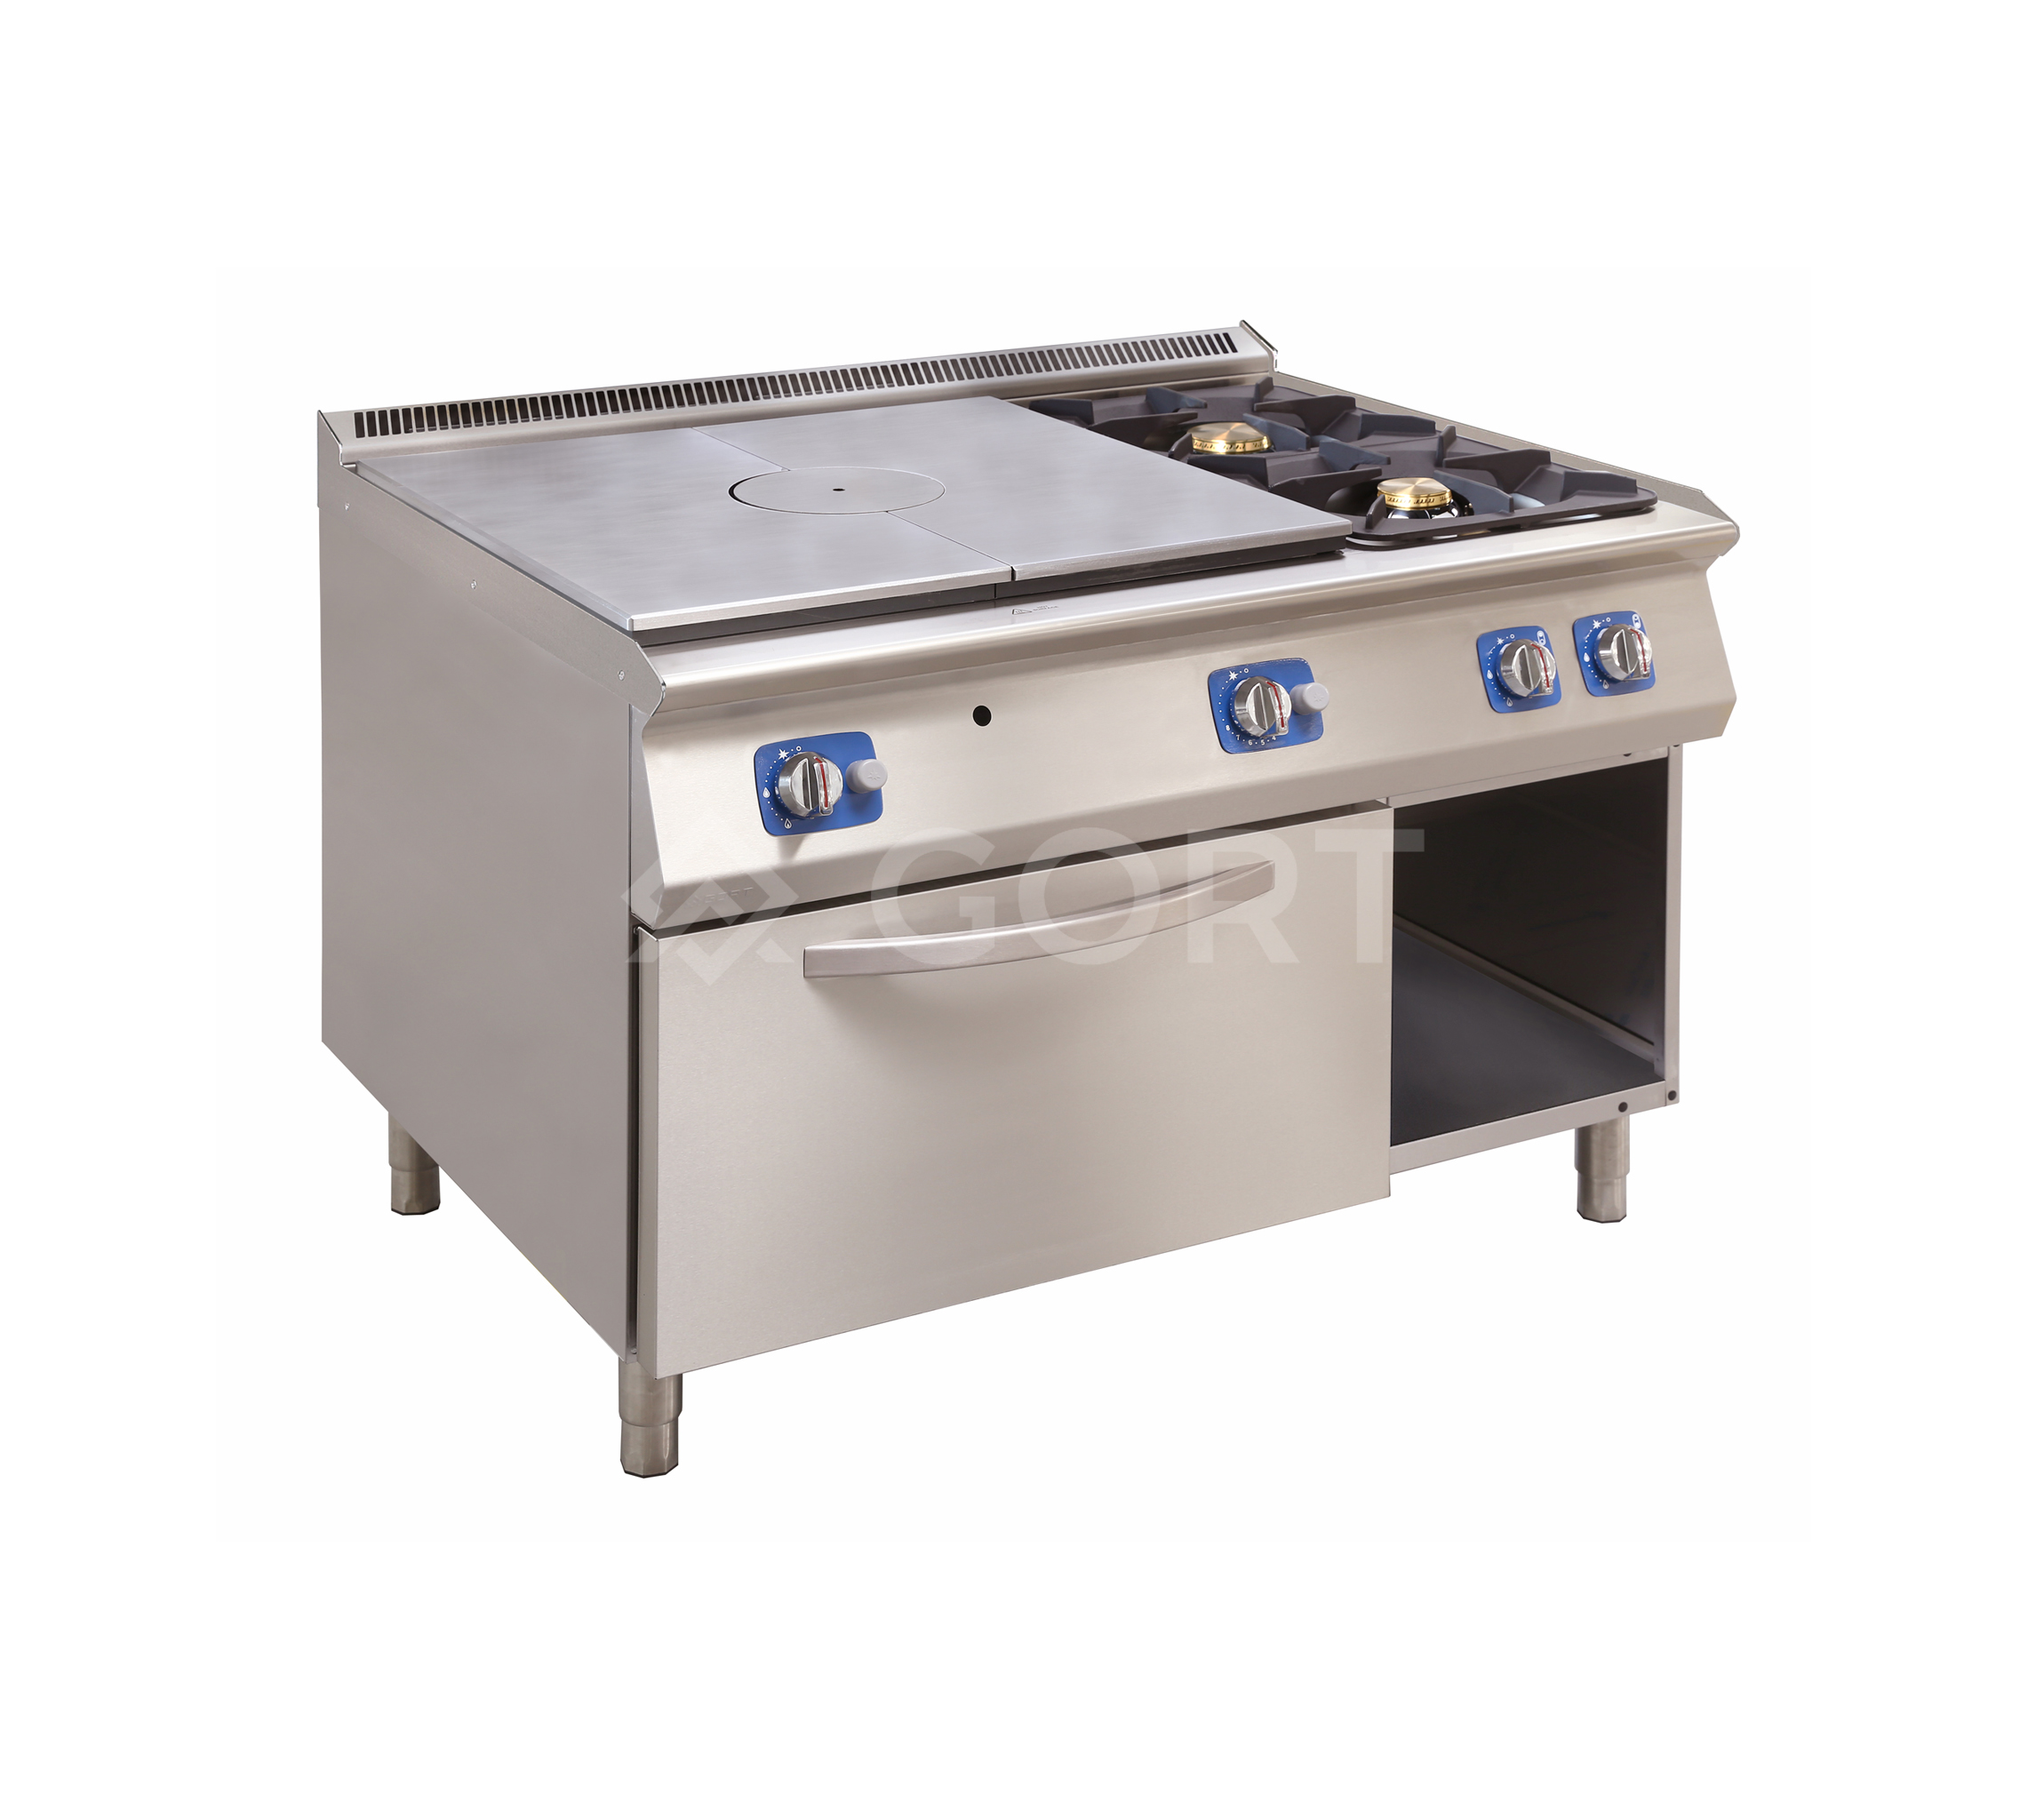 Gas solid top with 2 burner gas cooking top on gas oven 1200 MM L900